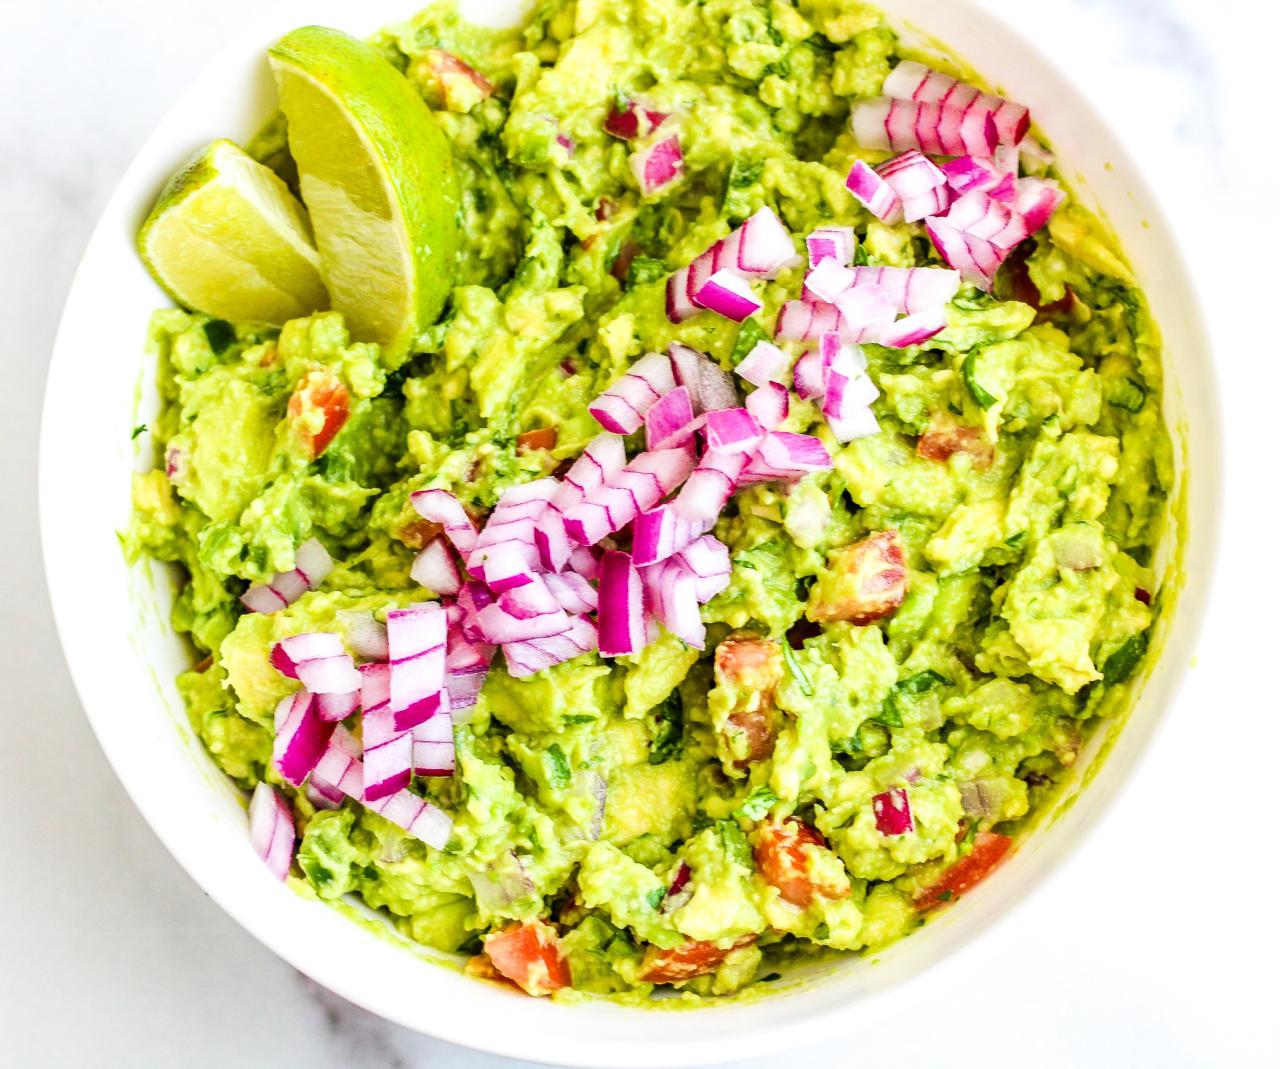 The Best Whole30 and Easy Guacamole - The Bettered Blondie